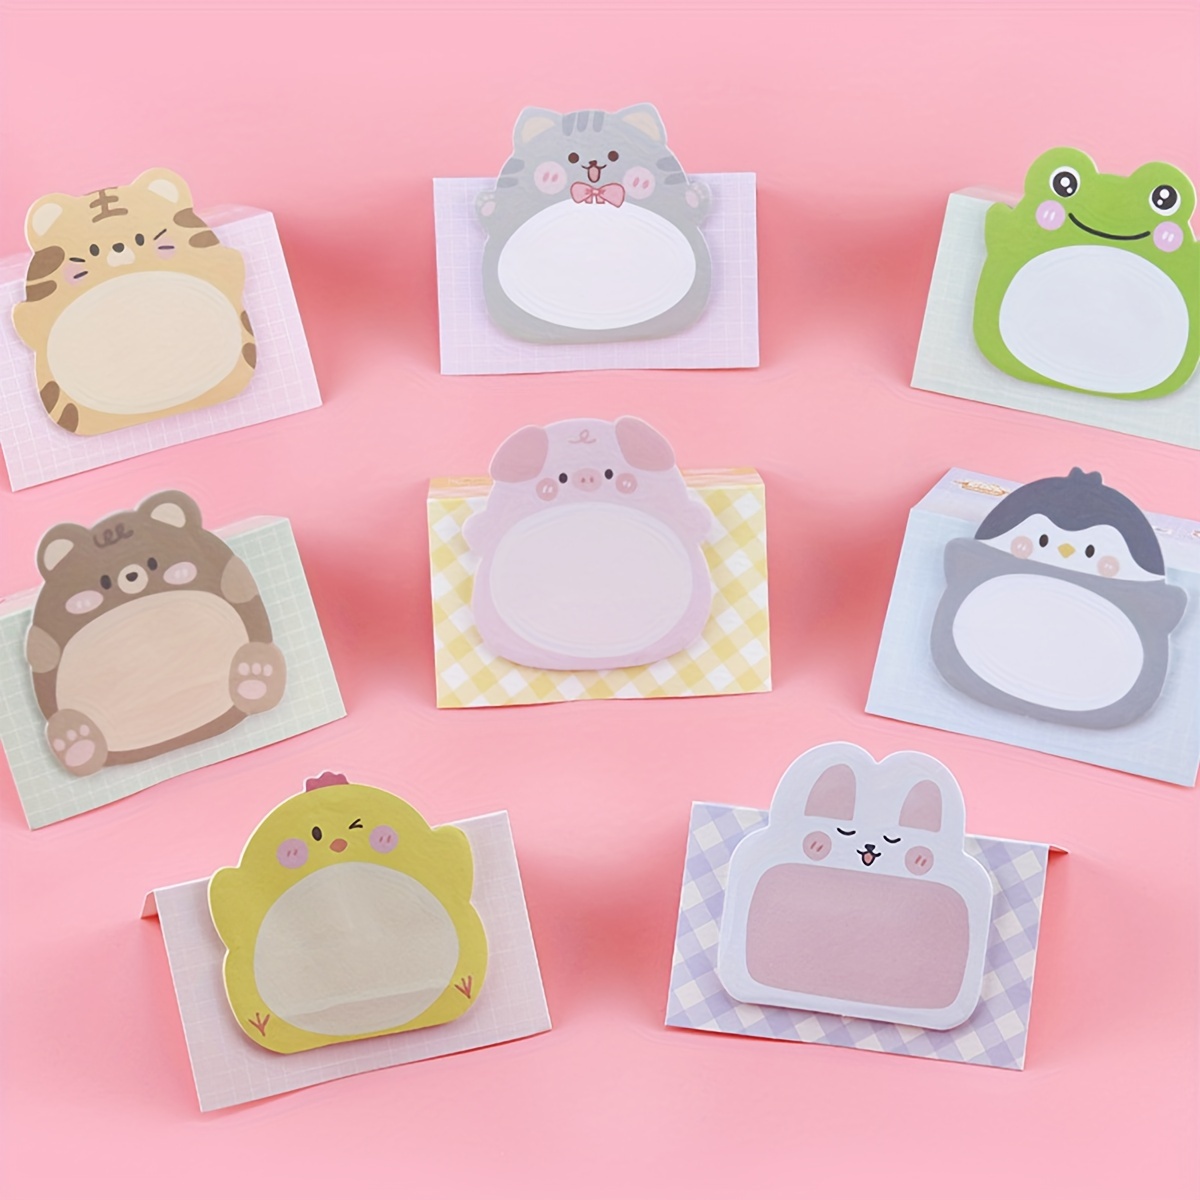 

8pcs Cute Cartoon Animal Sticky Notes, Creative Animal Standing Message Memo Note Stickers